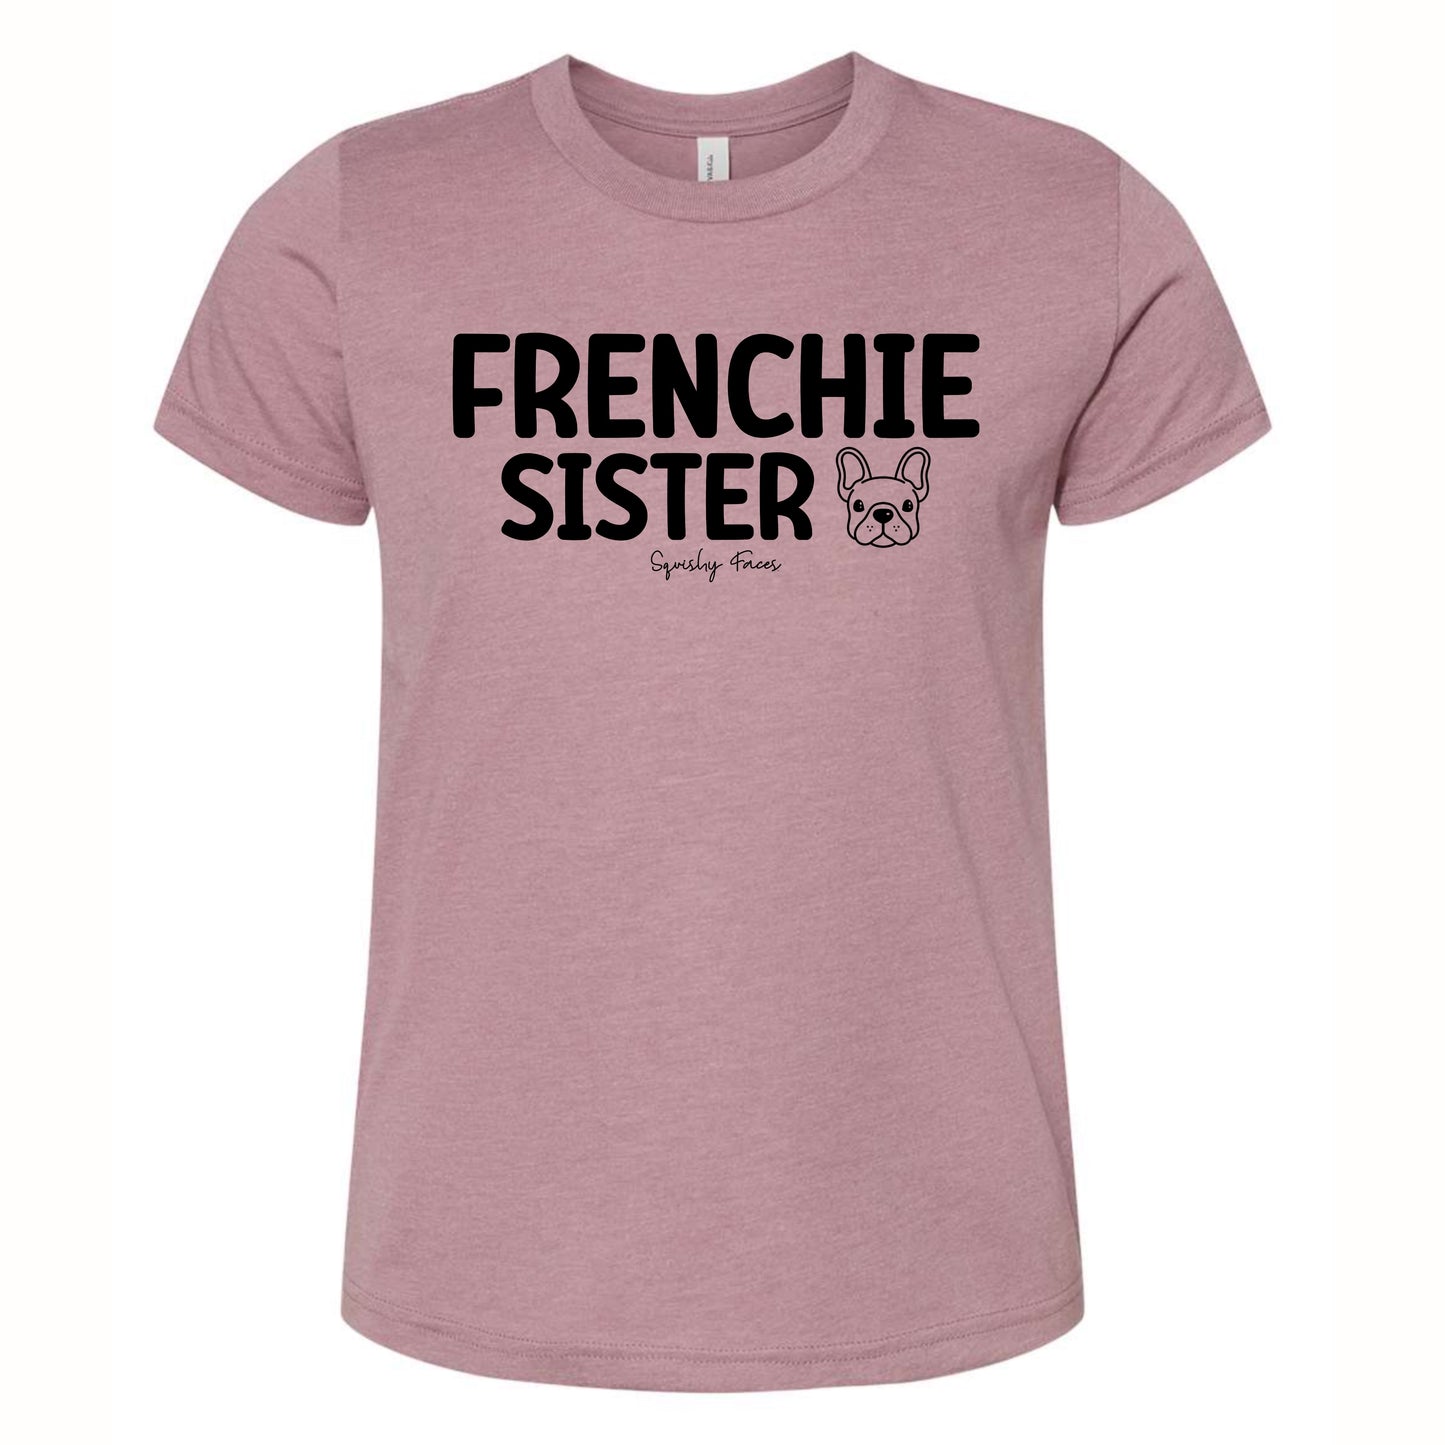 Frenchie Sister